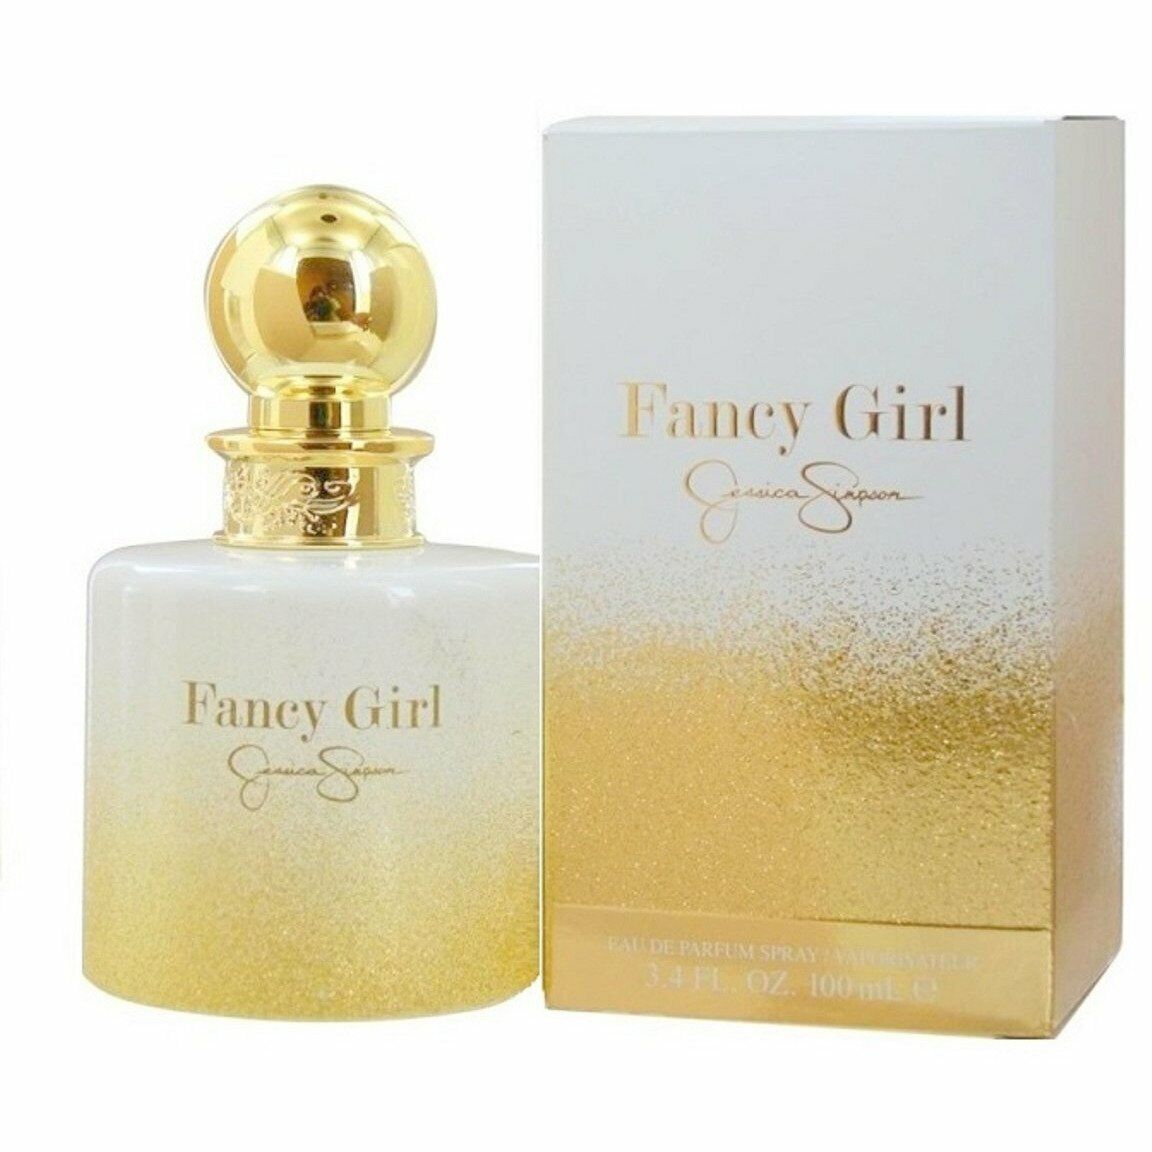 Fancy Girl by Jessica Simpson 3.3 / 3.4 oz EDP For Women New in Box